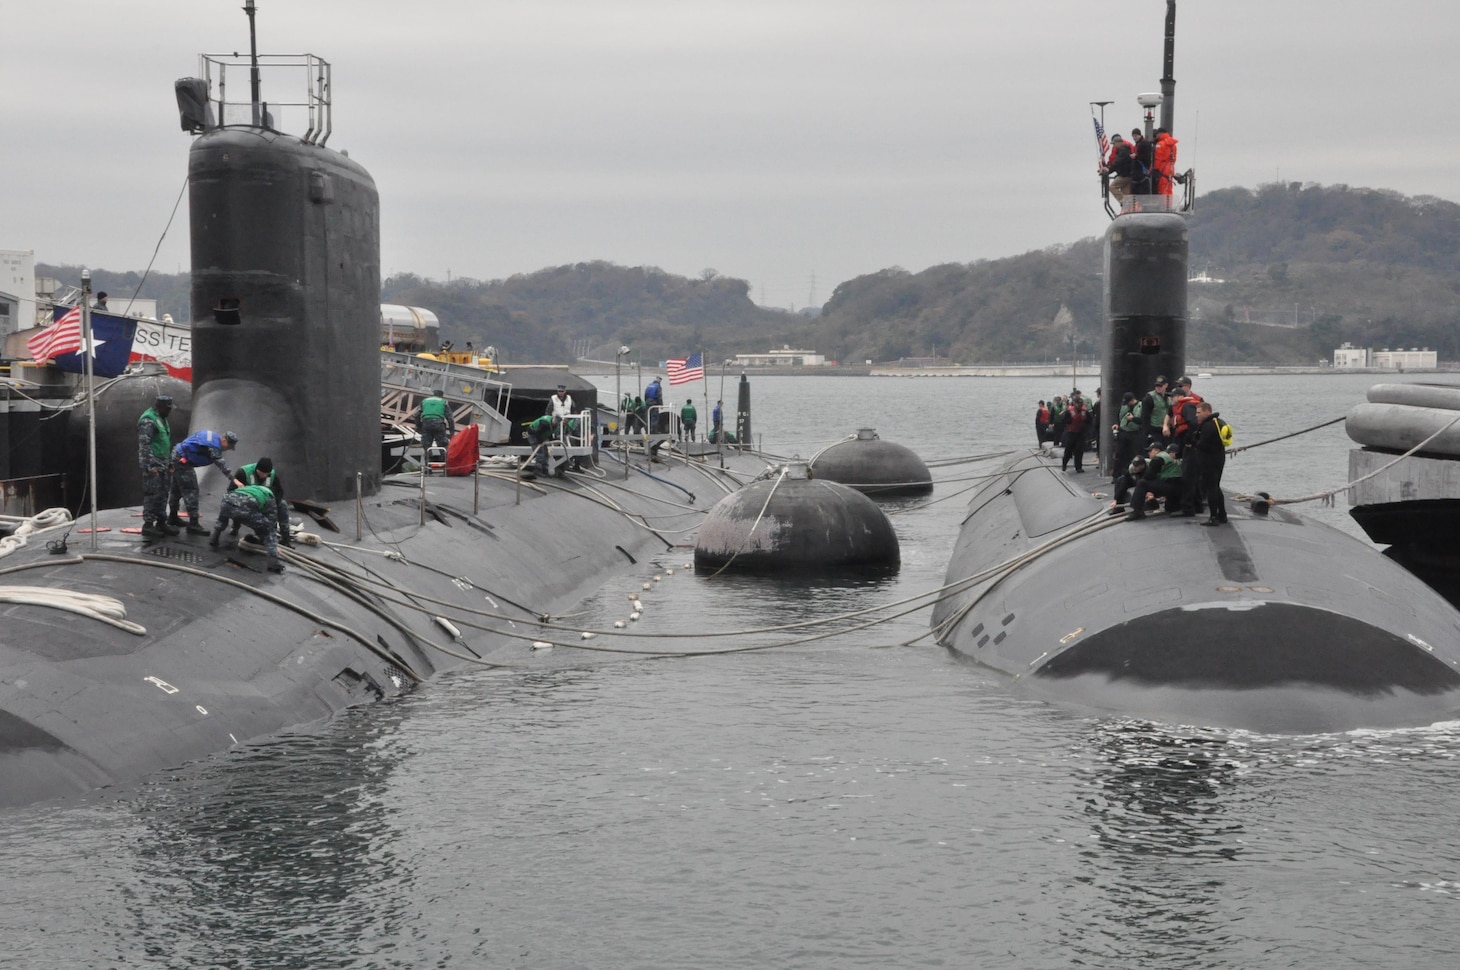 151223-N-OX023-
FLEET ACTIVITIES YOKOSUKA, Japan (December 23 2015) - USS Charlotte (SSN 766) moors outboard of USS Texas (SSN 775) at Commander, Fleet Activities Yokosuka. Commander, Submarine Group 7 provide support for submarines deployed to the 5th and 7th Fleet areas of operations. (U.S. Navy photo by Lt. Cmdr. Aaron Kakiel/ Released) 